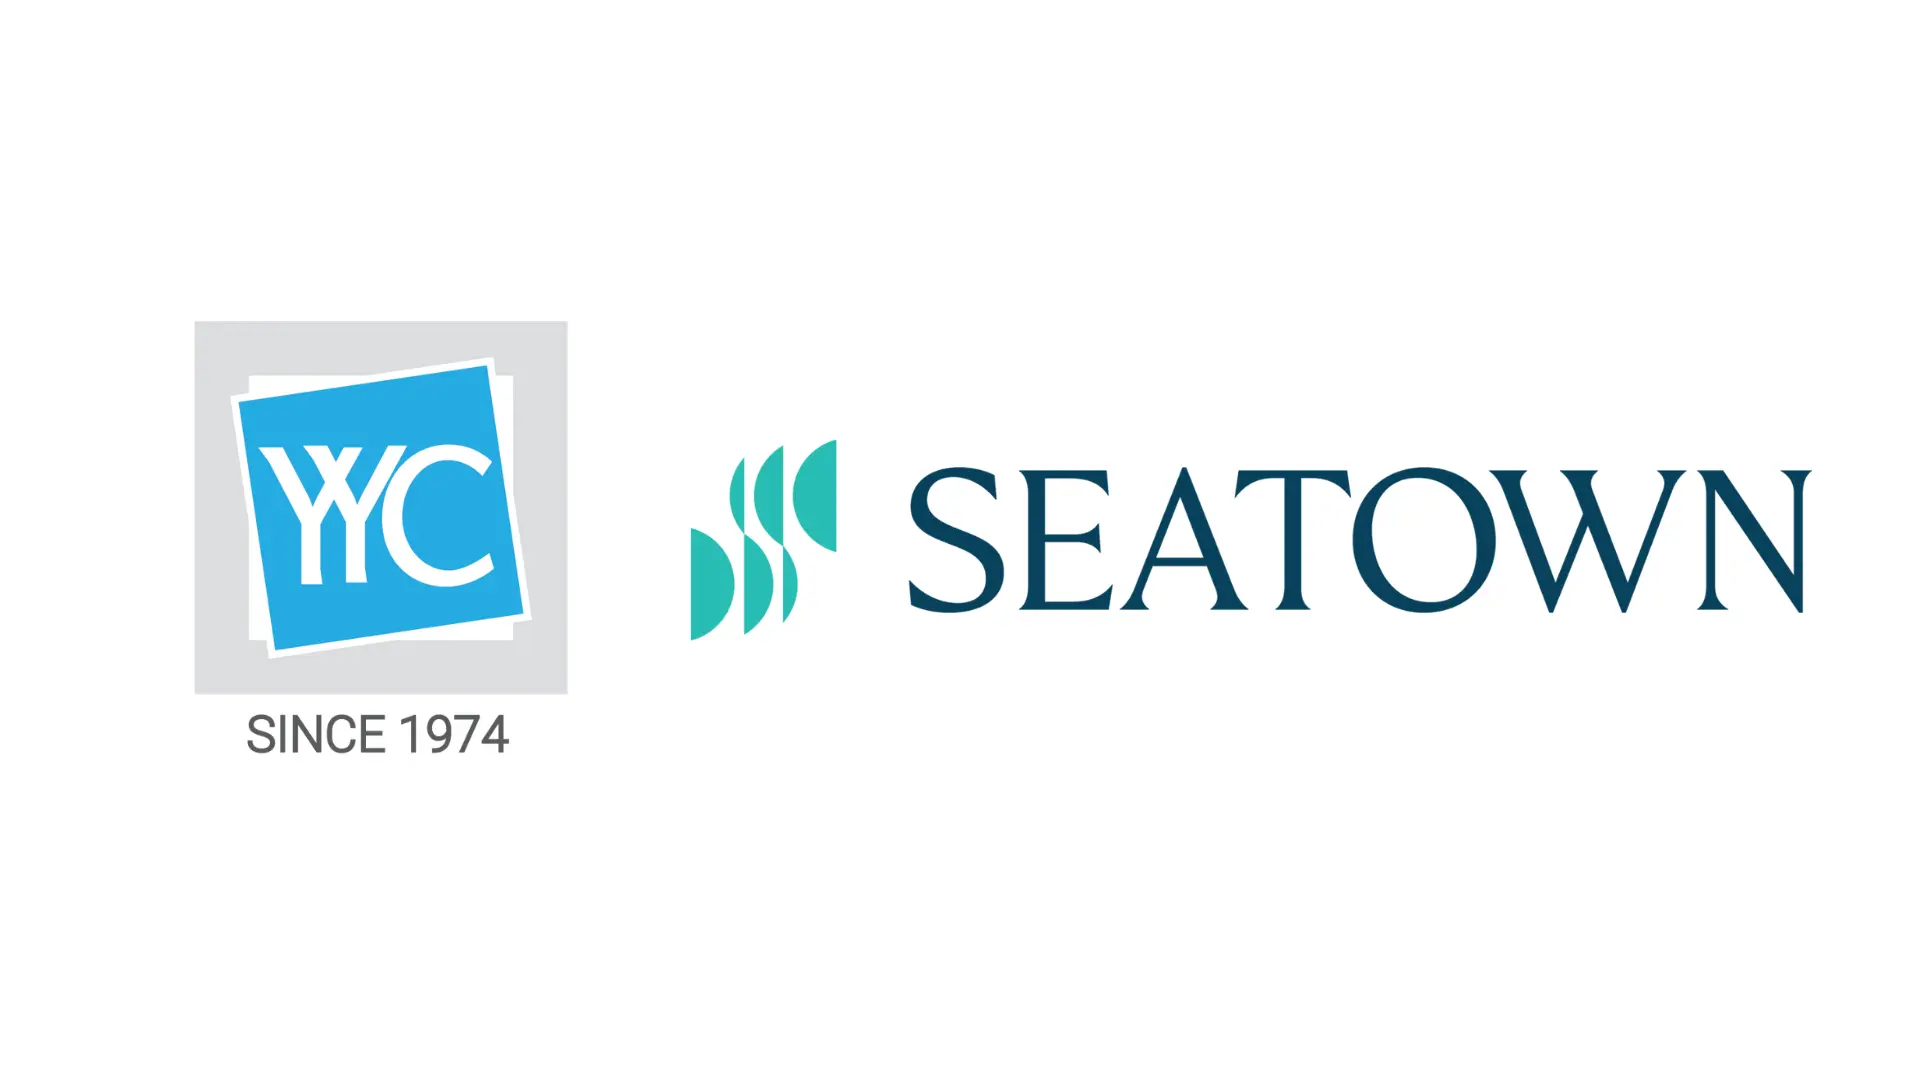 We are pleased to announce that we have entered into a definitive investment agreement with SeaTown Private Capital Master Fund. 